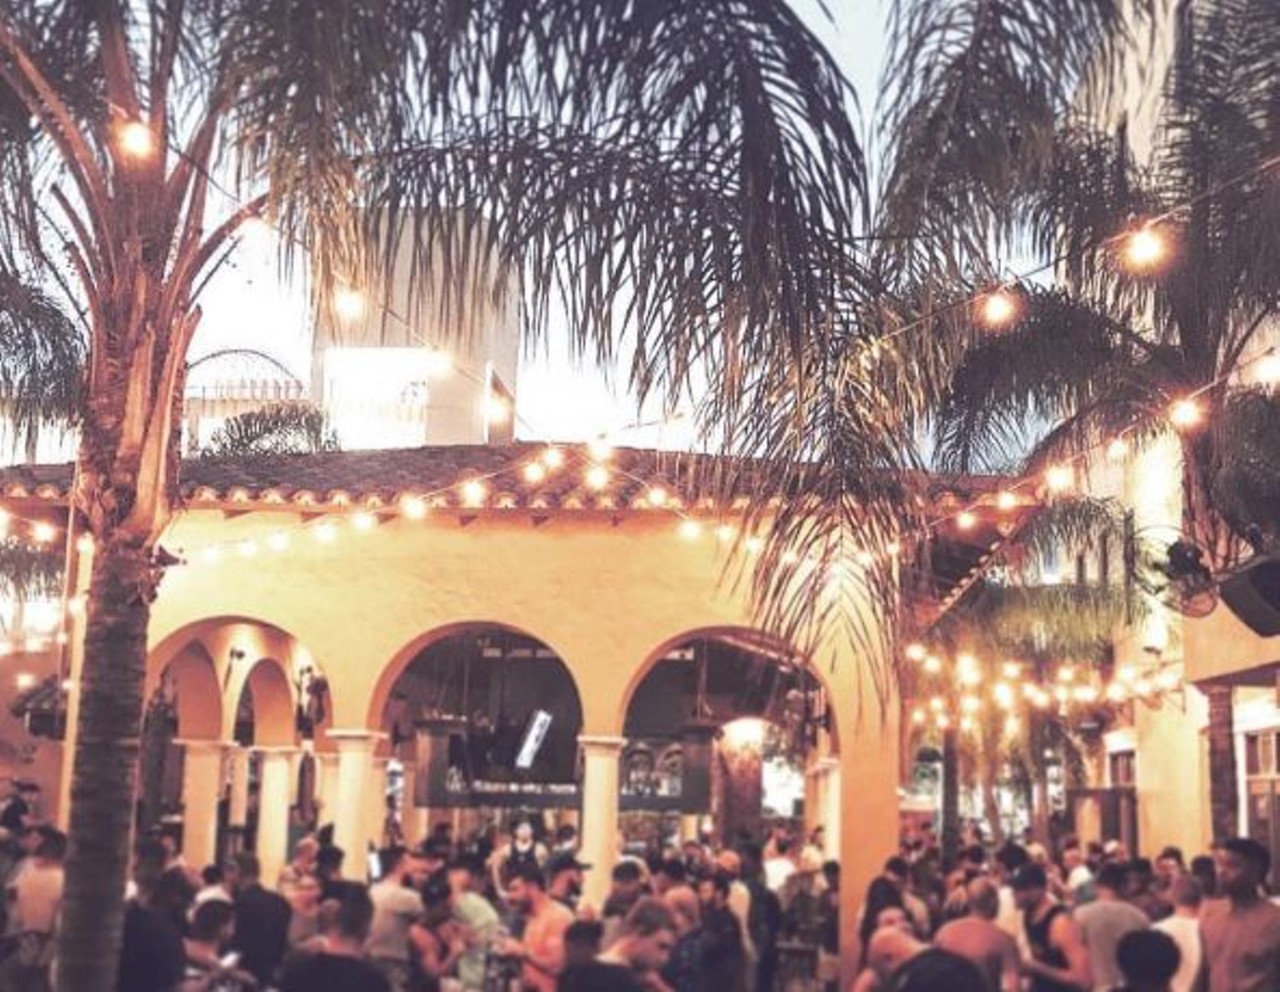 Ember
42 W. Central Blvd, 407-849-5200
This popular downtown restaurant and bar is sure to impress your company. Just grab a drink and take a seat in its beautiful, terracotta courtyard. 
Photo via emberorlando/Instagram